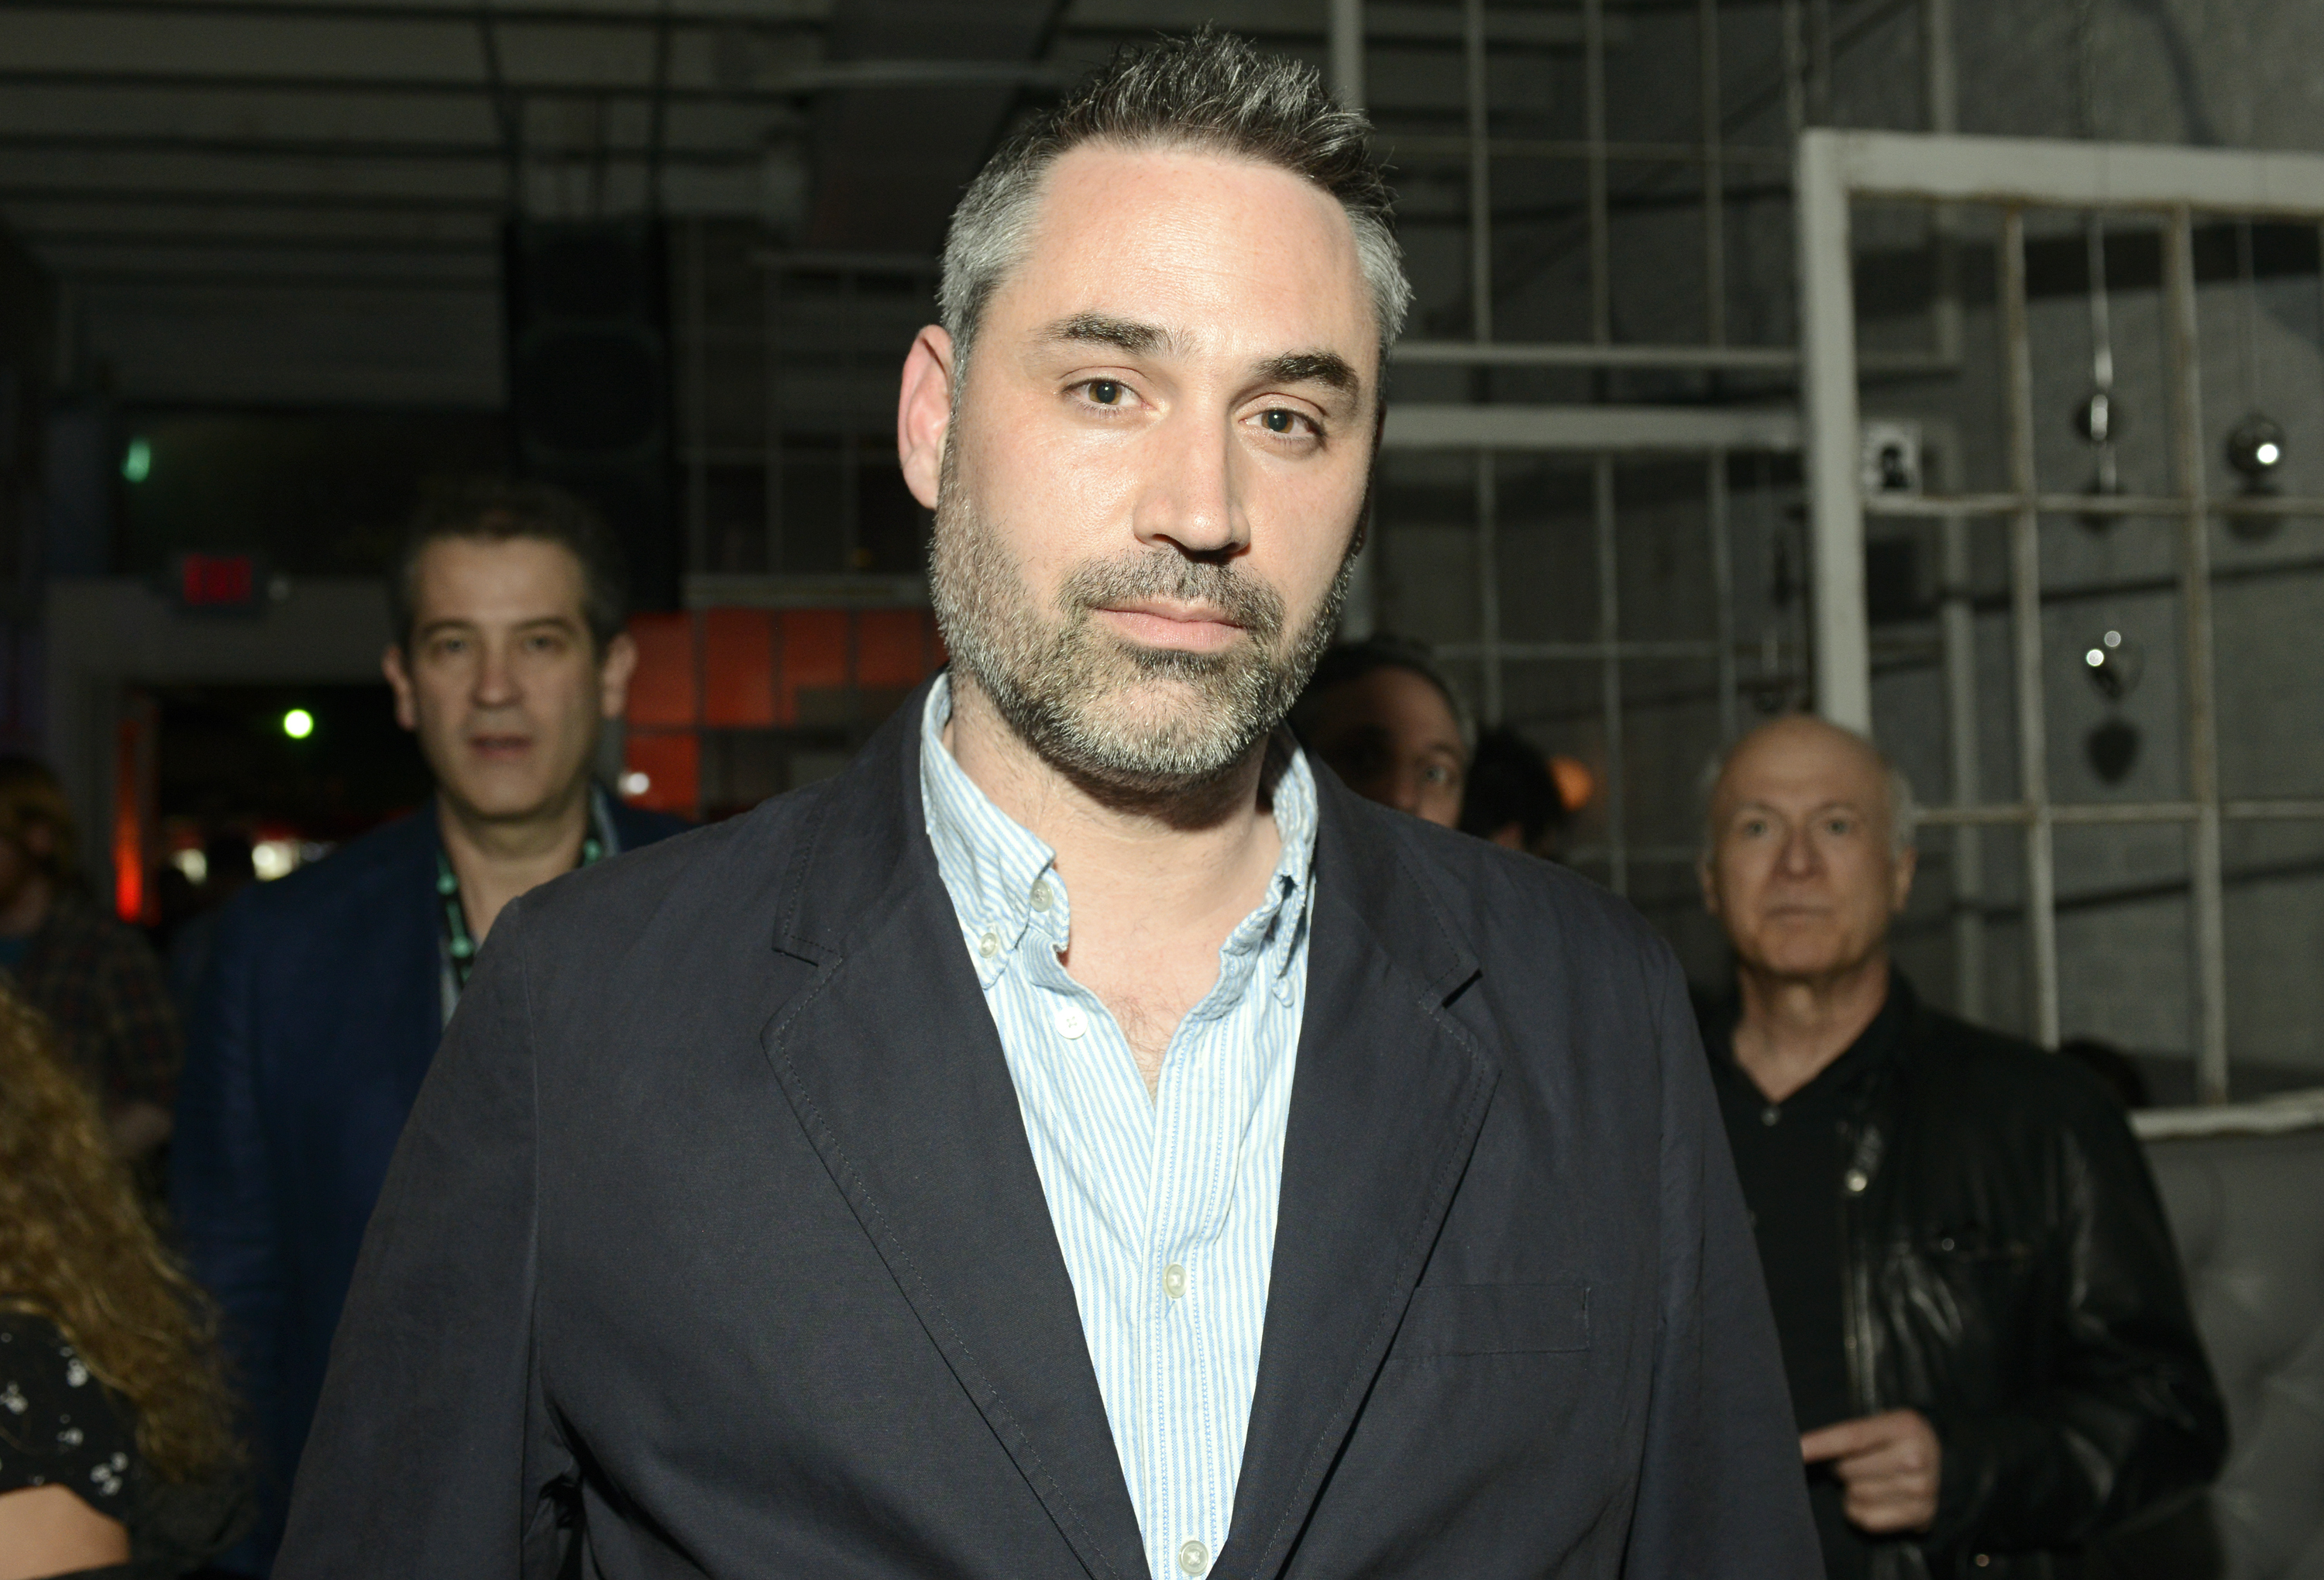 Alex Garland attends the SXSW "Ex Machina" Premiere Party at the Swan Dive nightclub on March 15, 2015 in Austin.